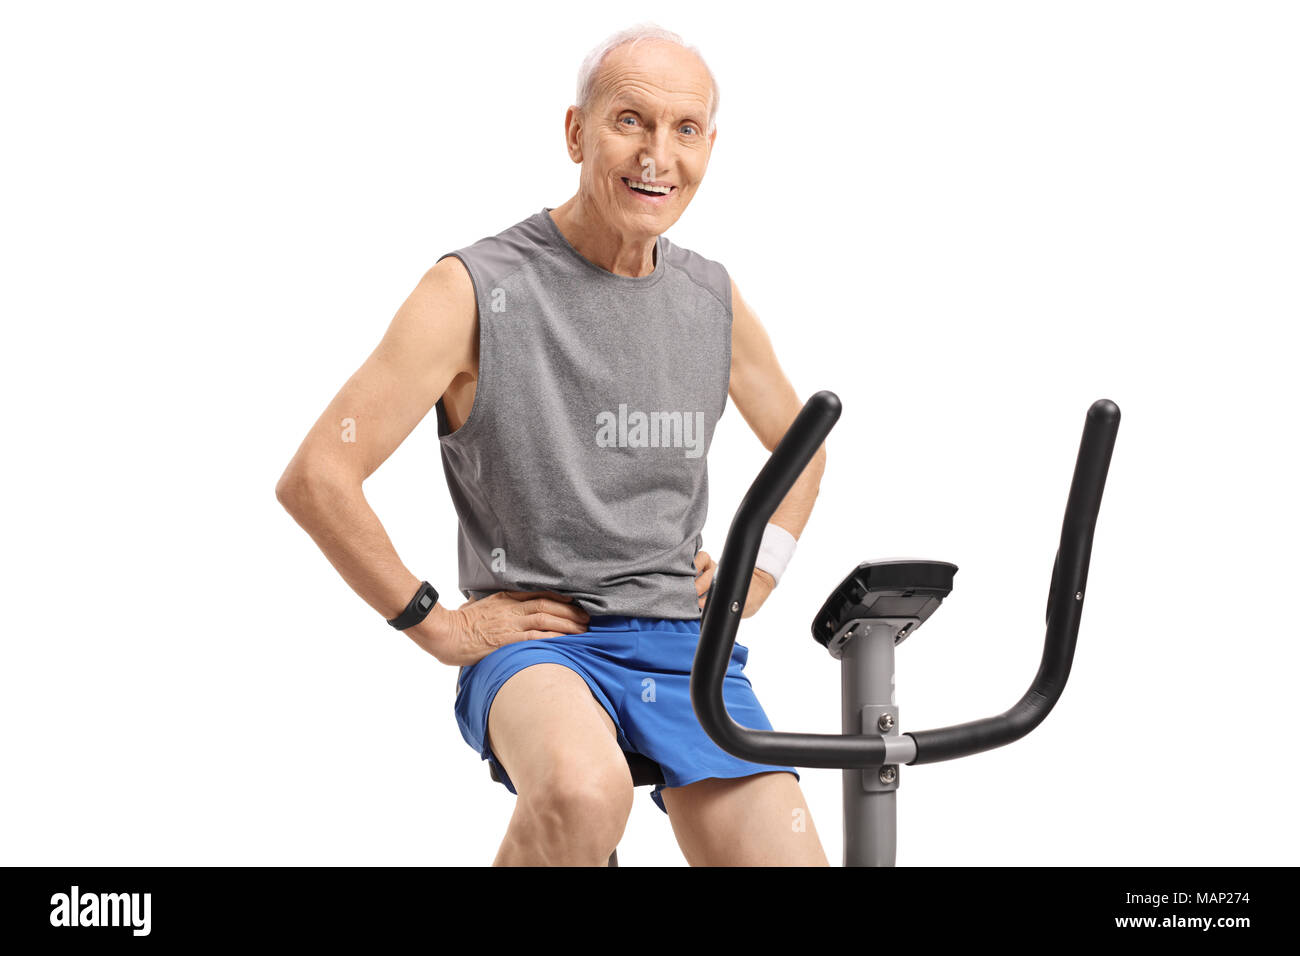 Fitness Endurance Meaning Working Out And Exercise Stock Photo - Alamy